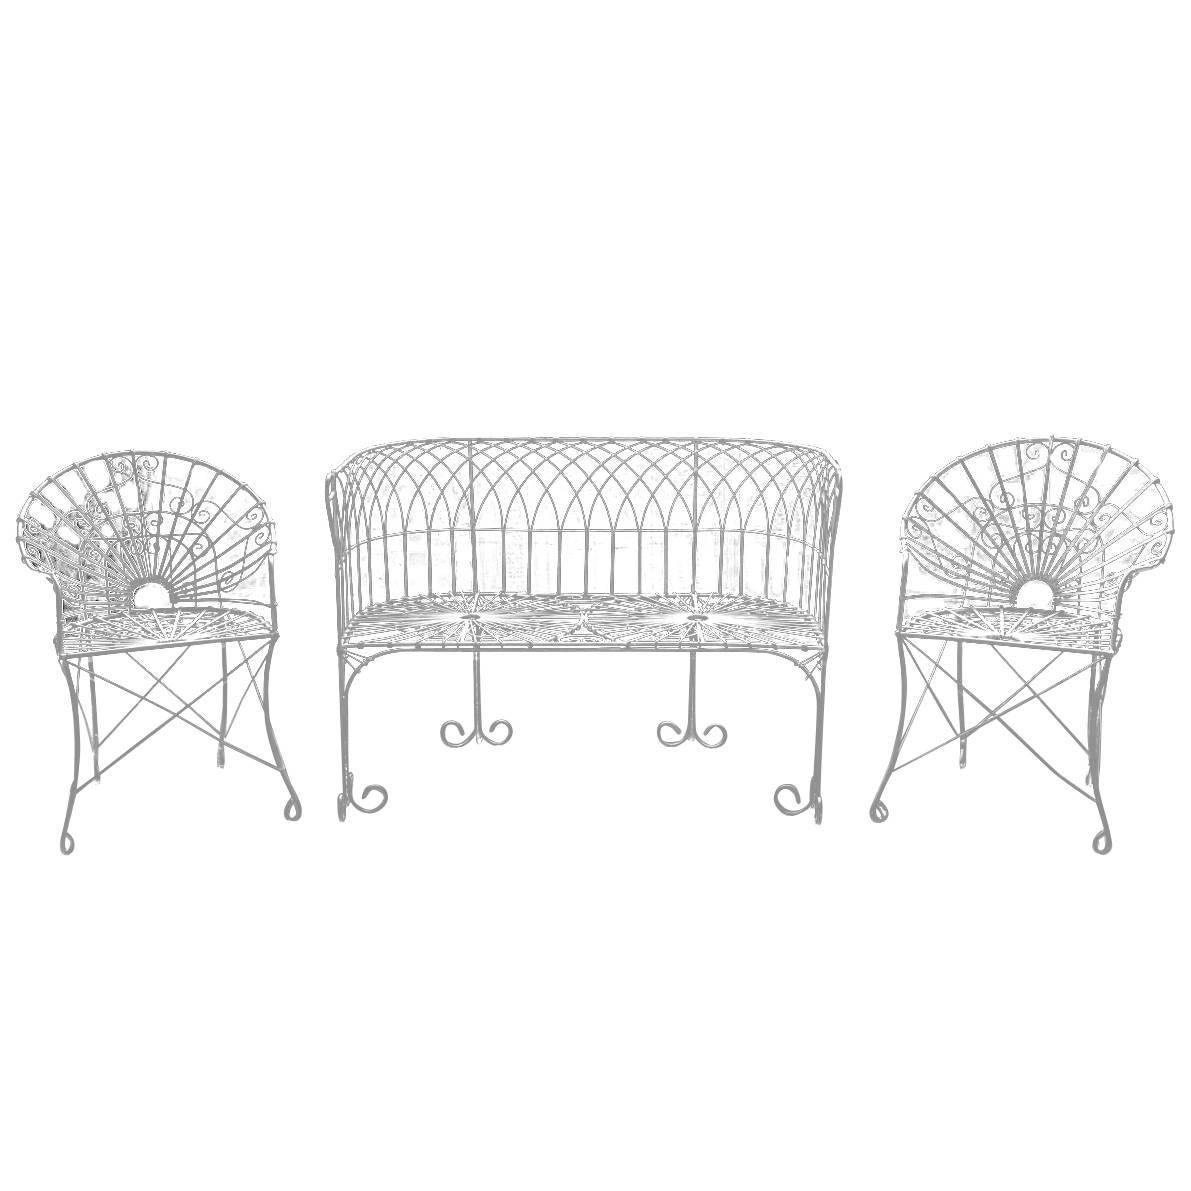 French Wrought Iron and Wire Garden Patio Set